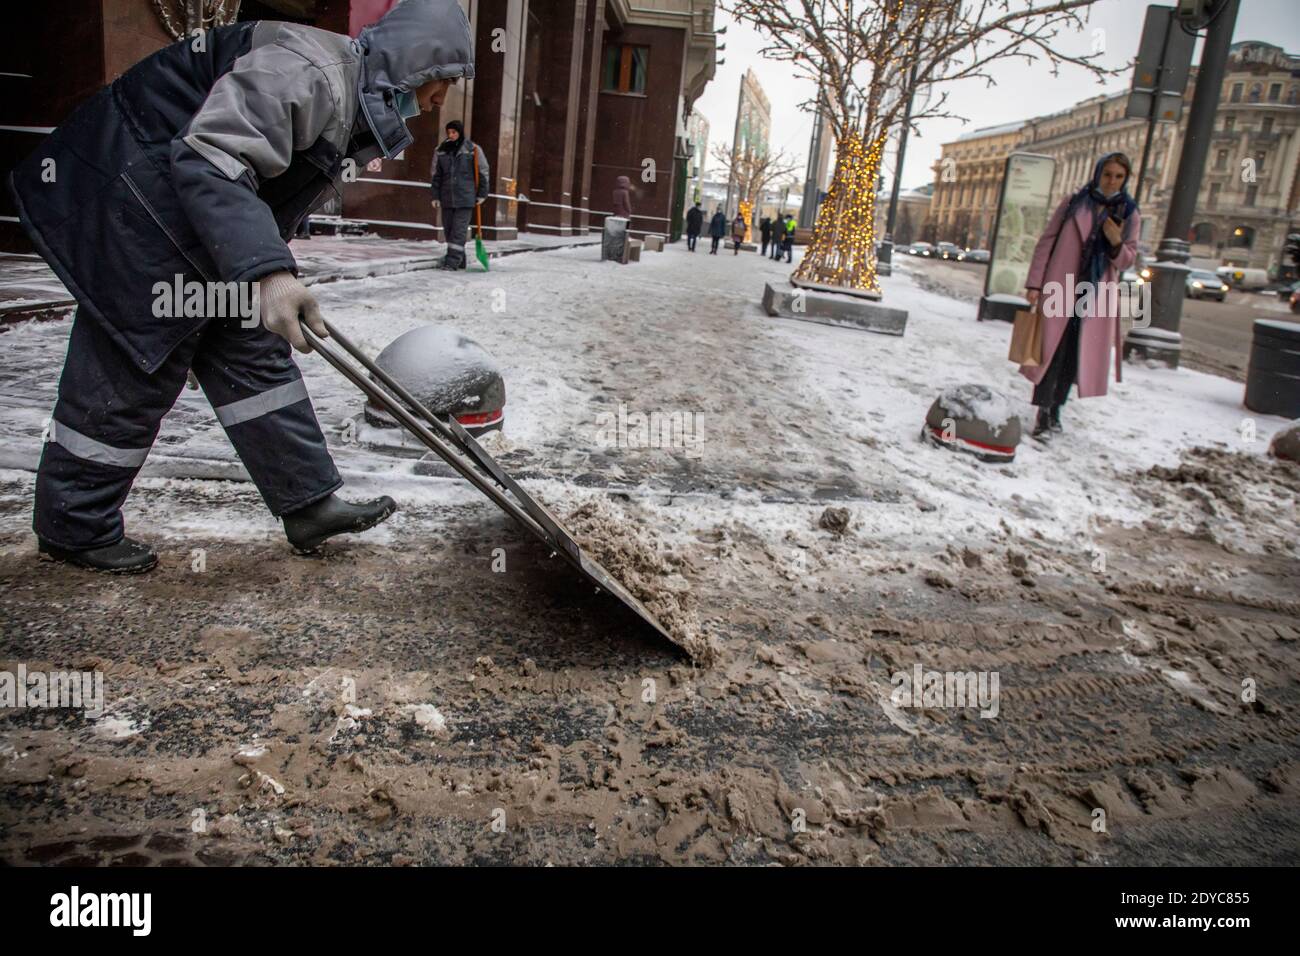 Moscow, Russia. 25th of December, 2020 An employee of a municipal service is engaged in cleaning the fallen snow on Okhotny Ryad street in the center of Moscow, Russia Stock Photo